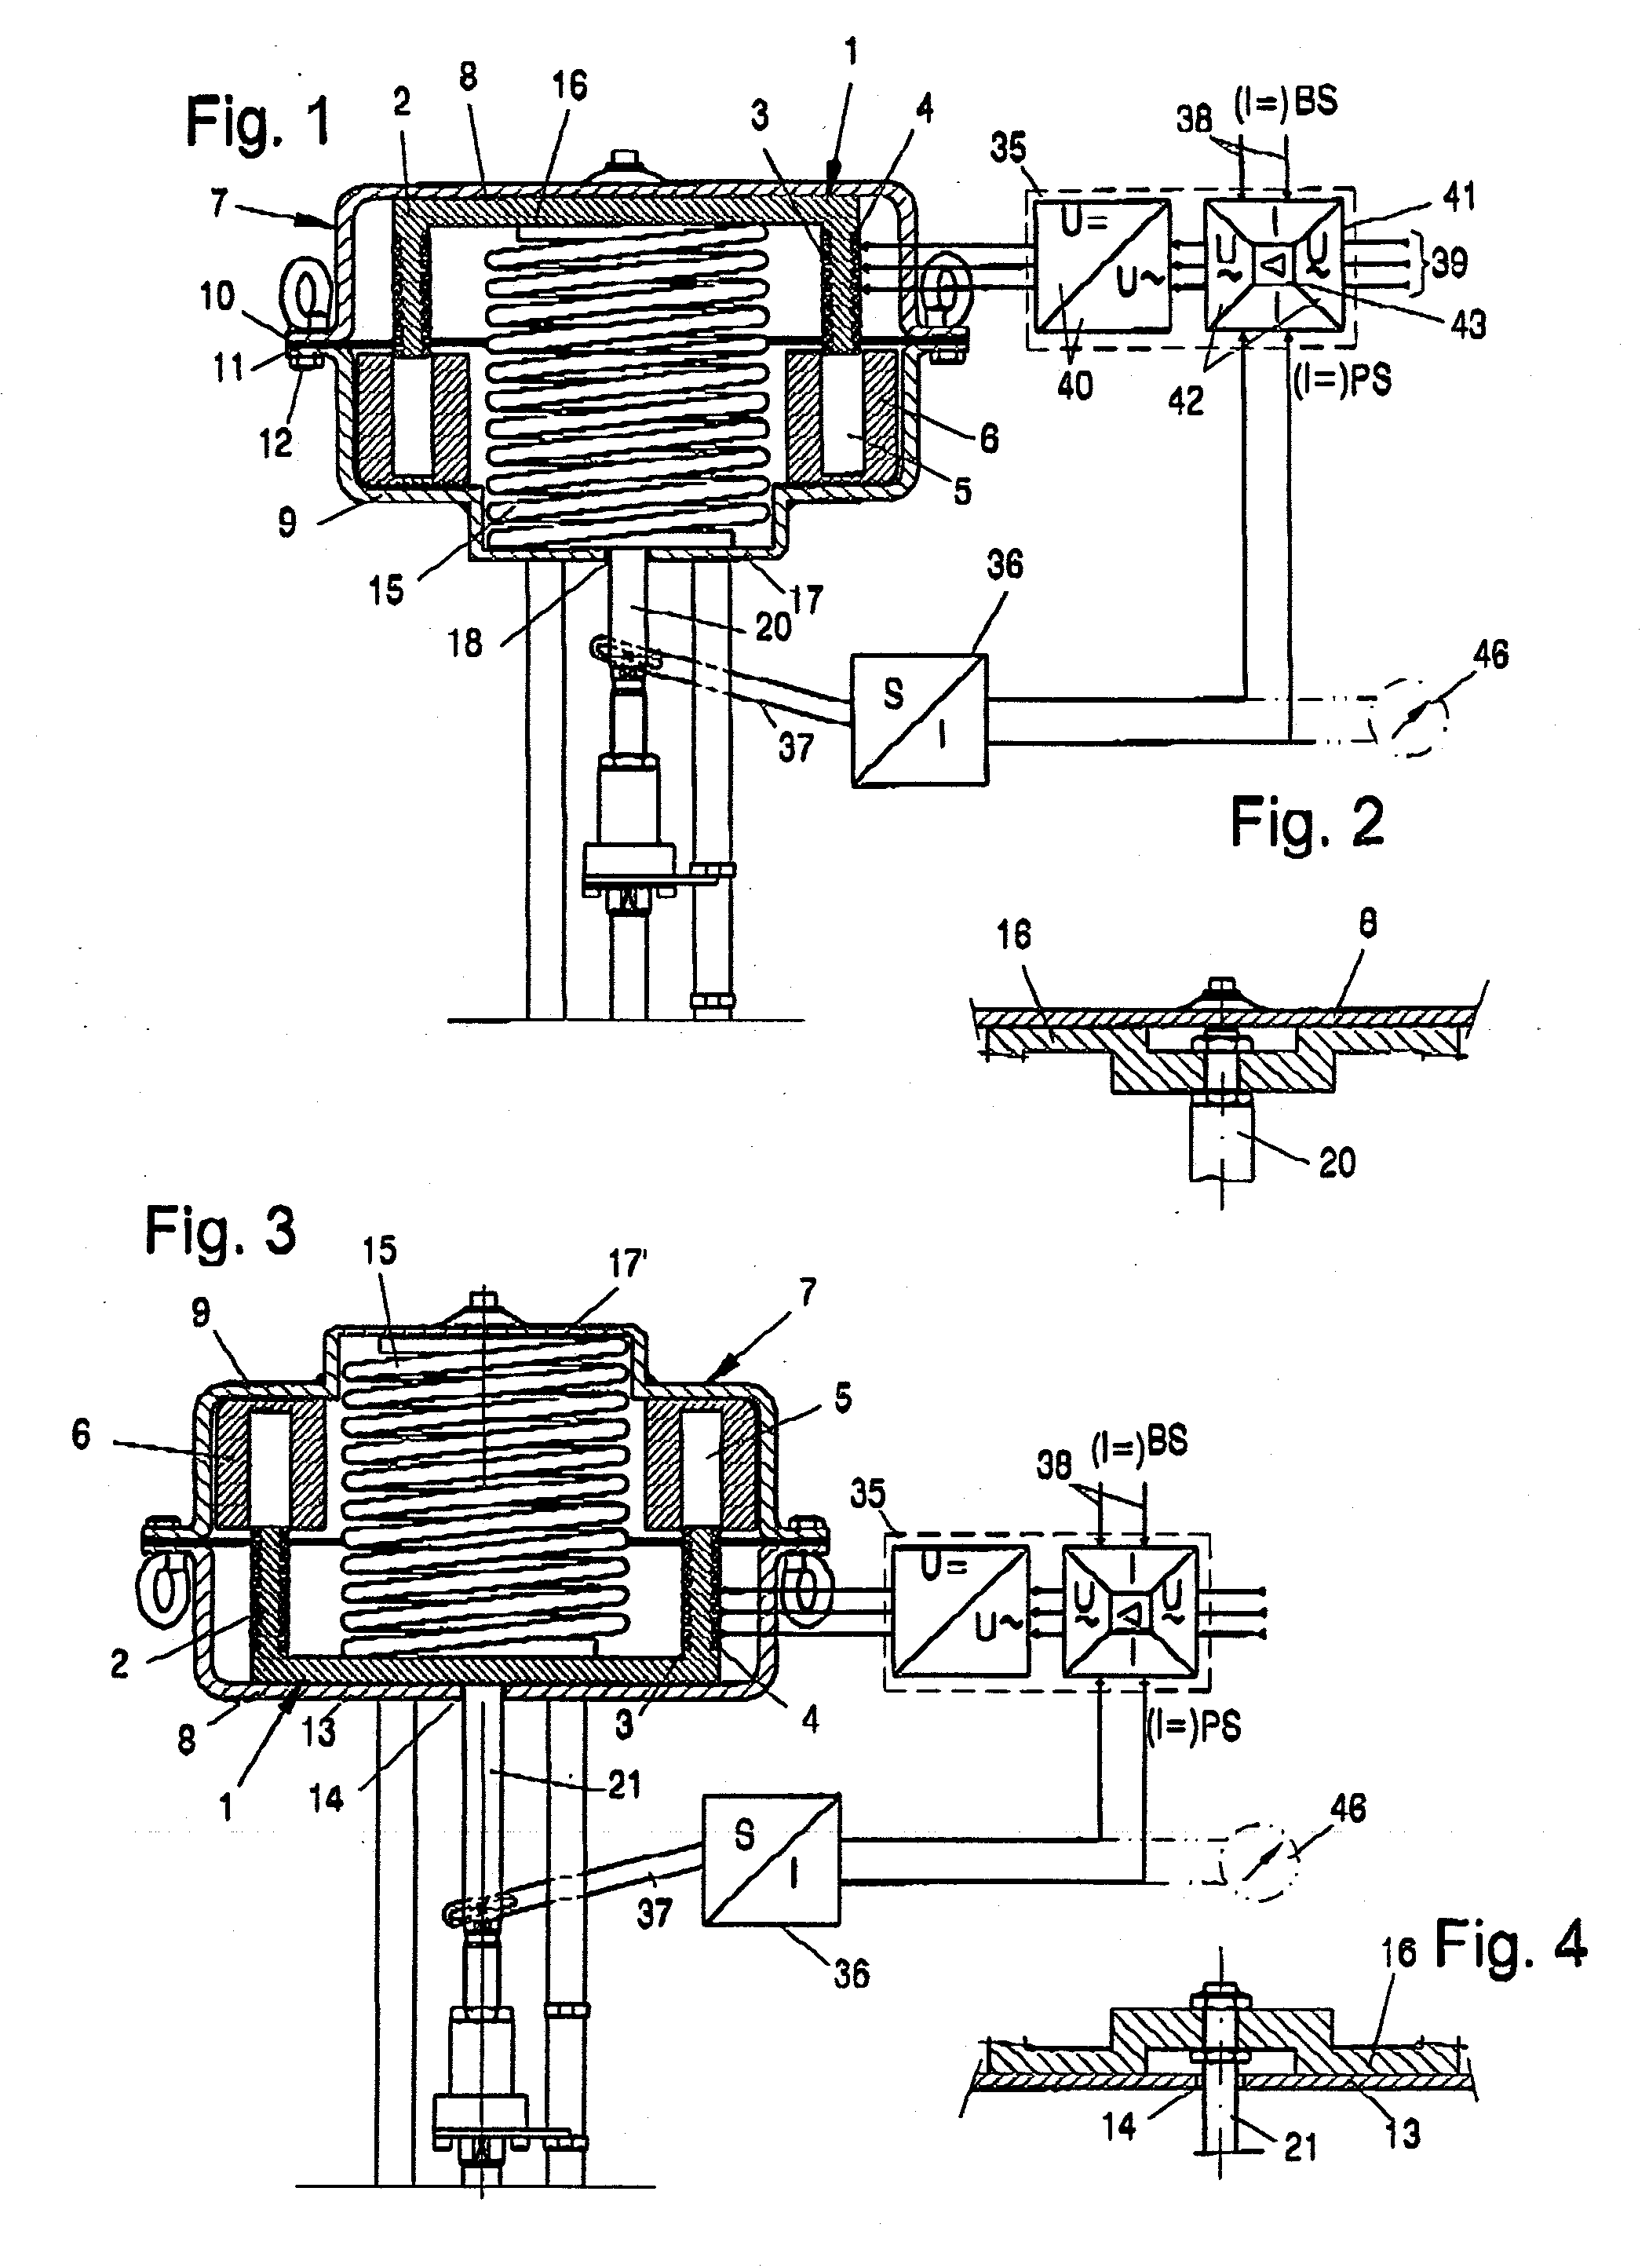 Actuator for control valves and/or shut-off devices